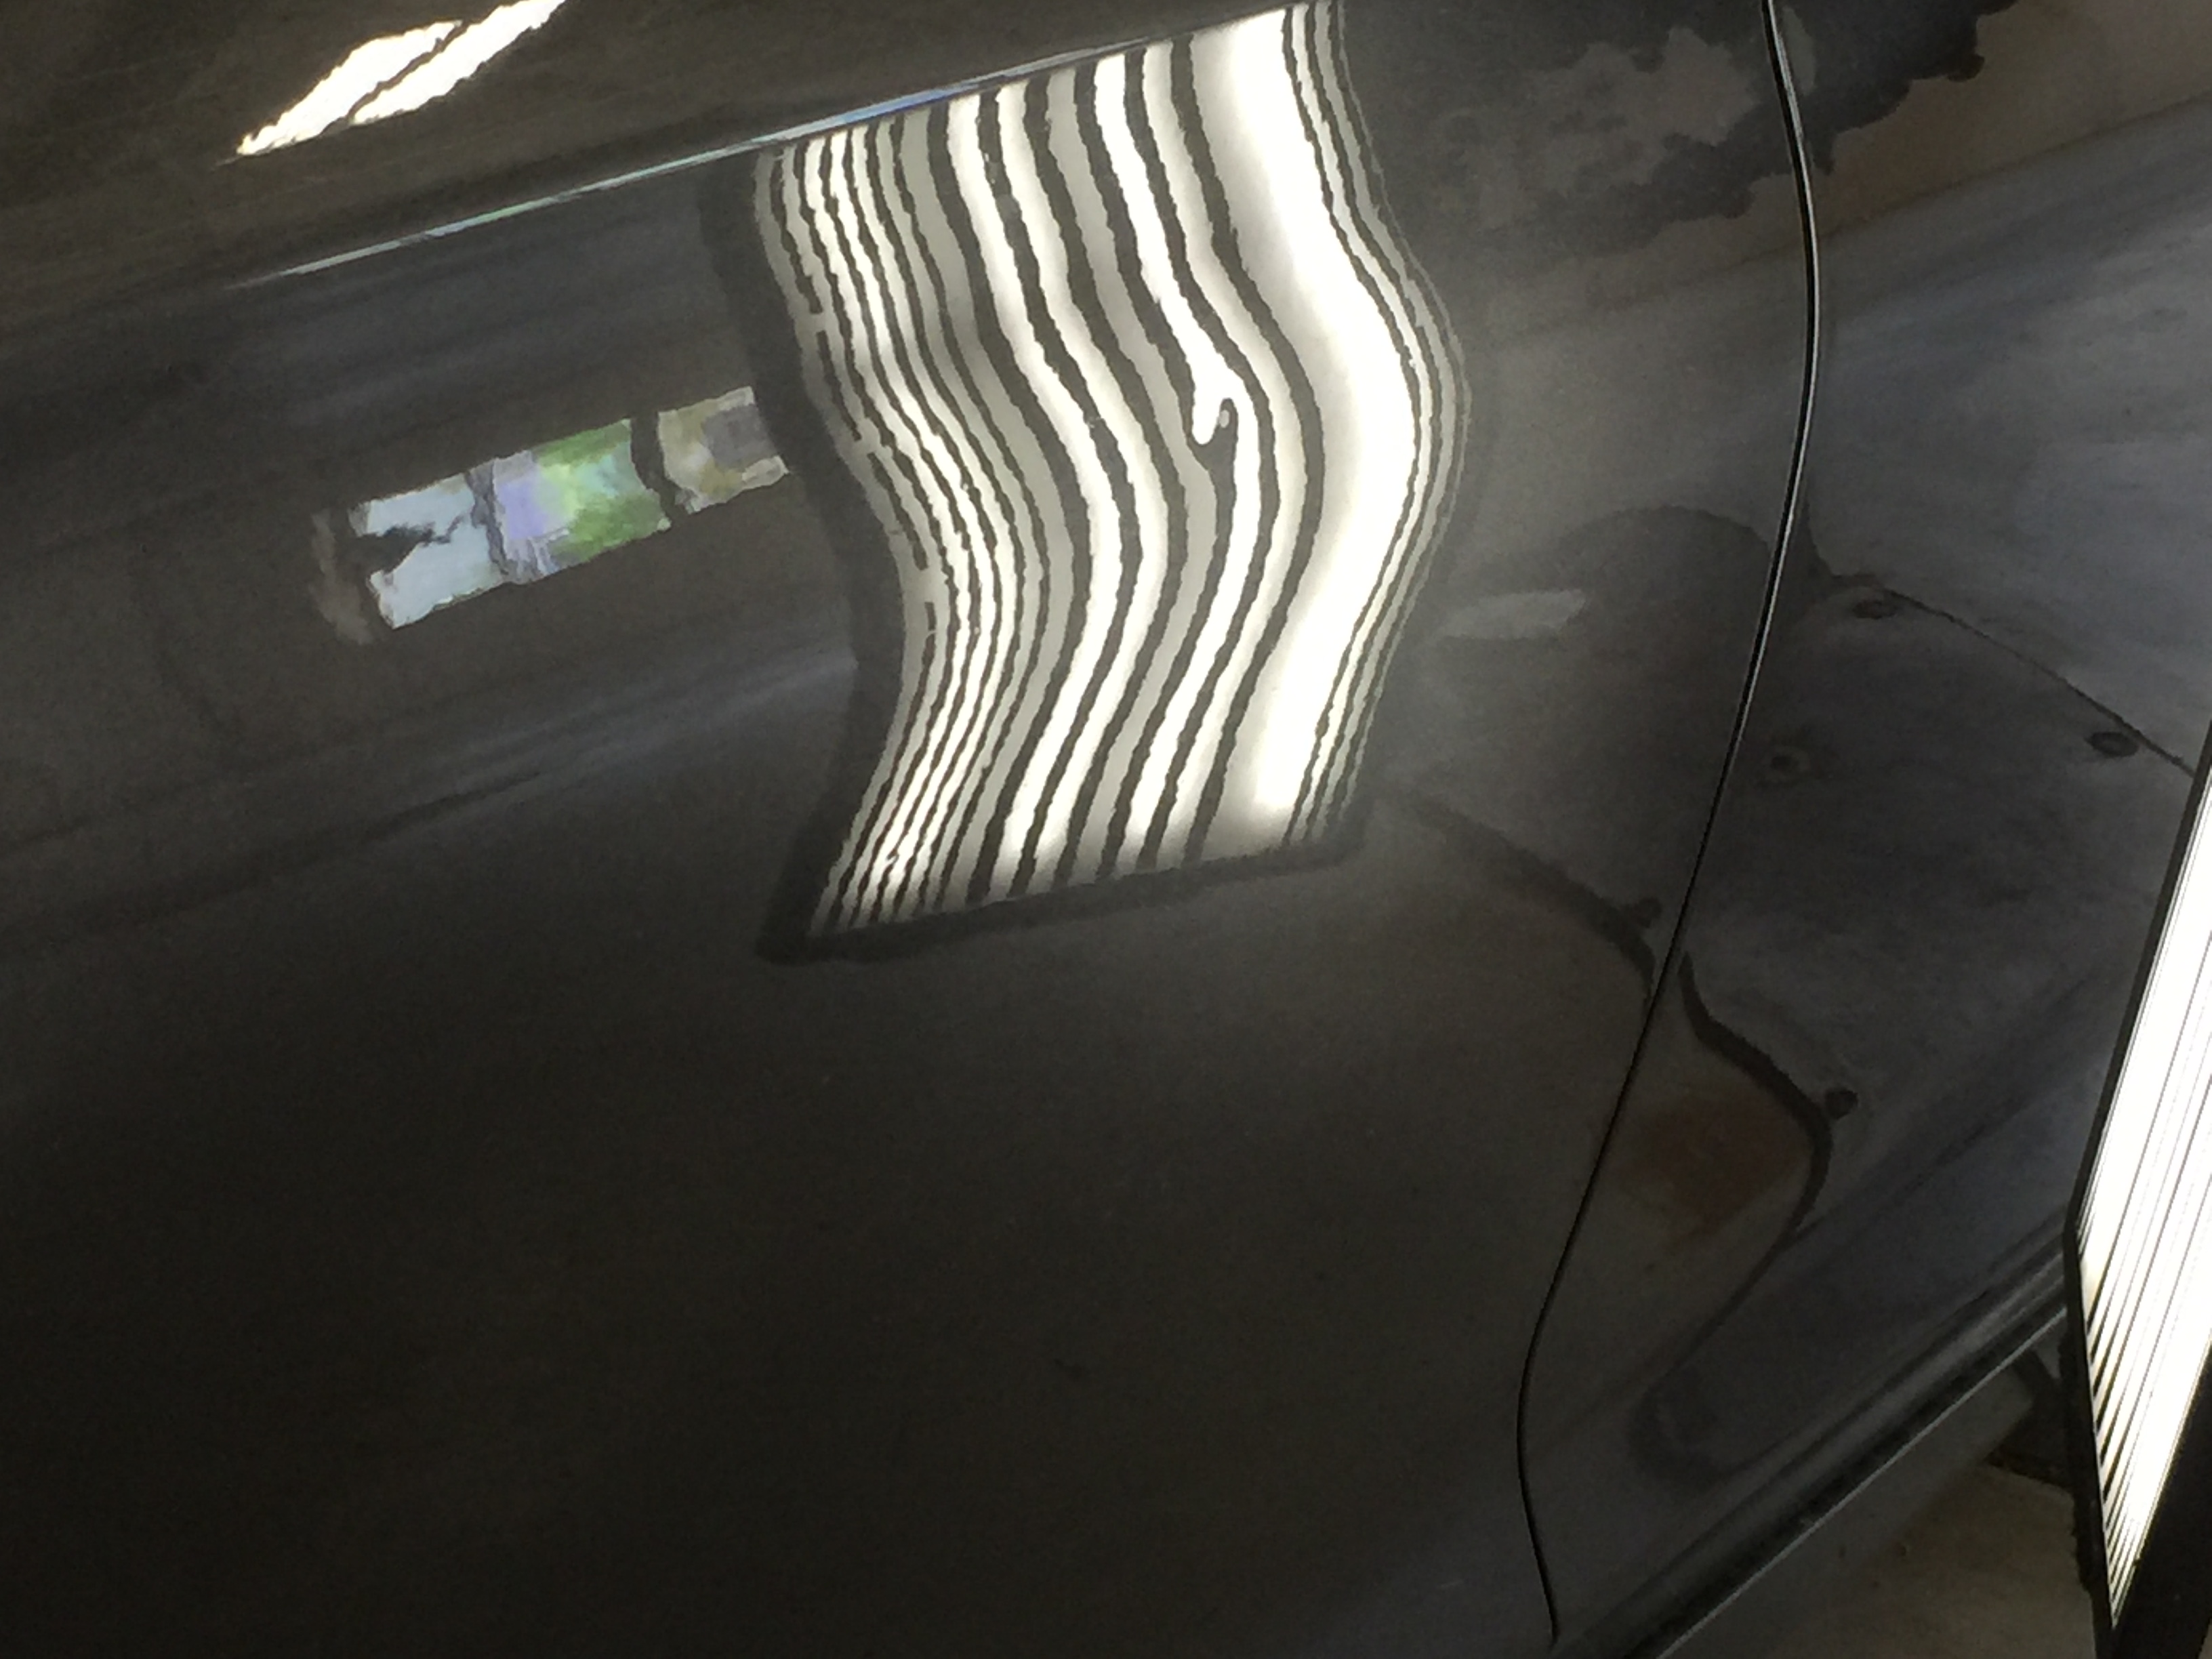 2015 Chrysler 200 Gray Metallic | Dent Removal On Passenger Side Rear Door. Work was done by Michael Bocek from 217dent.com. Go to https://217dent.com an estimate, or for more information about paintless dent removal